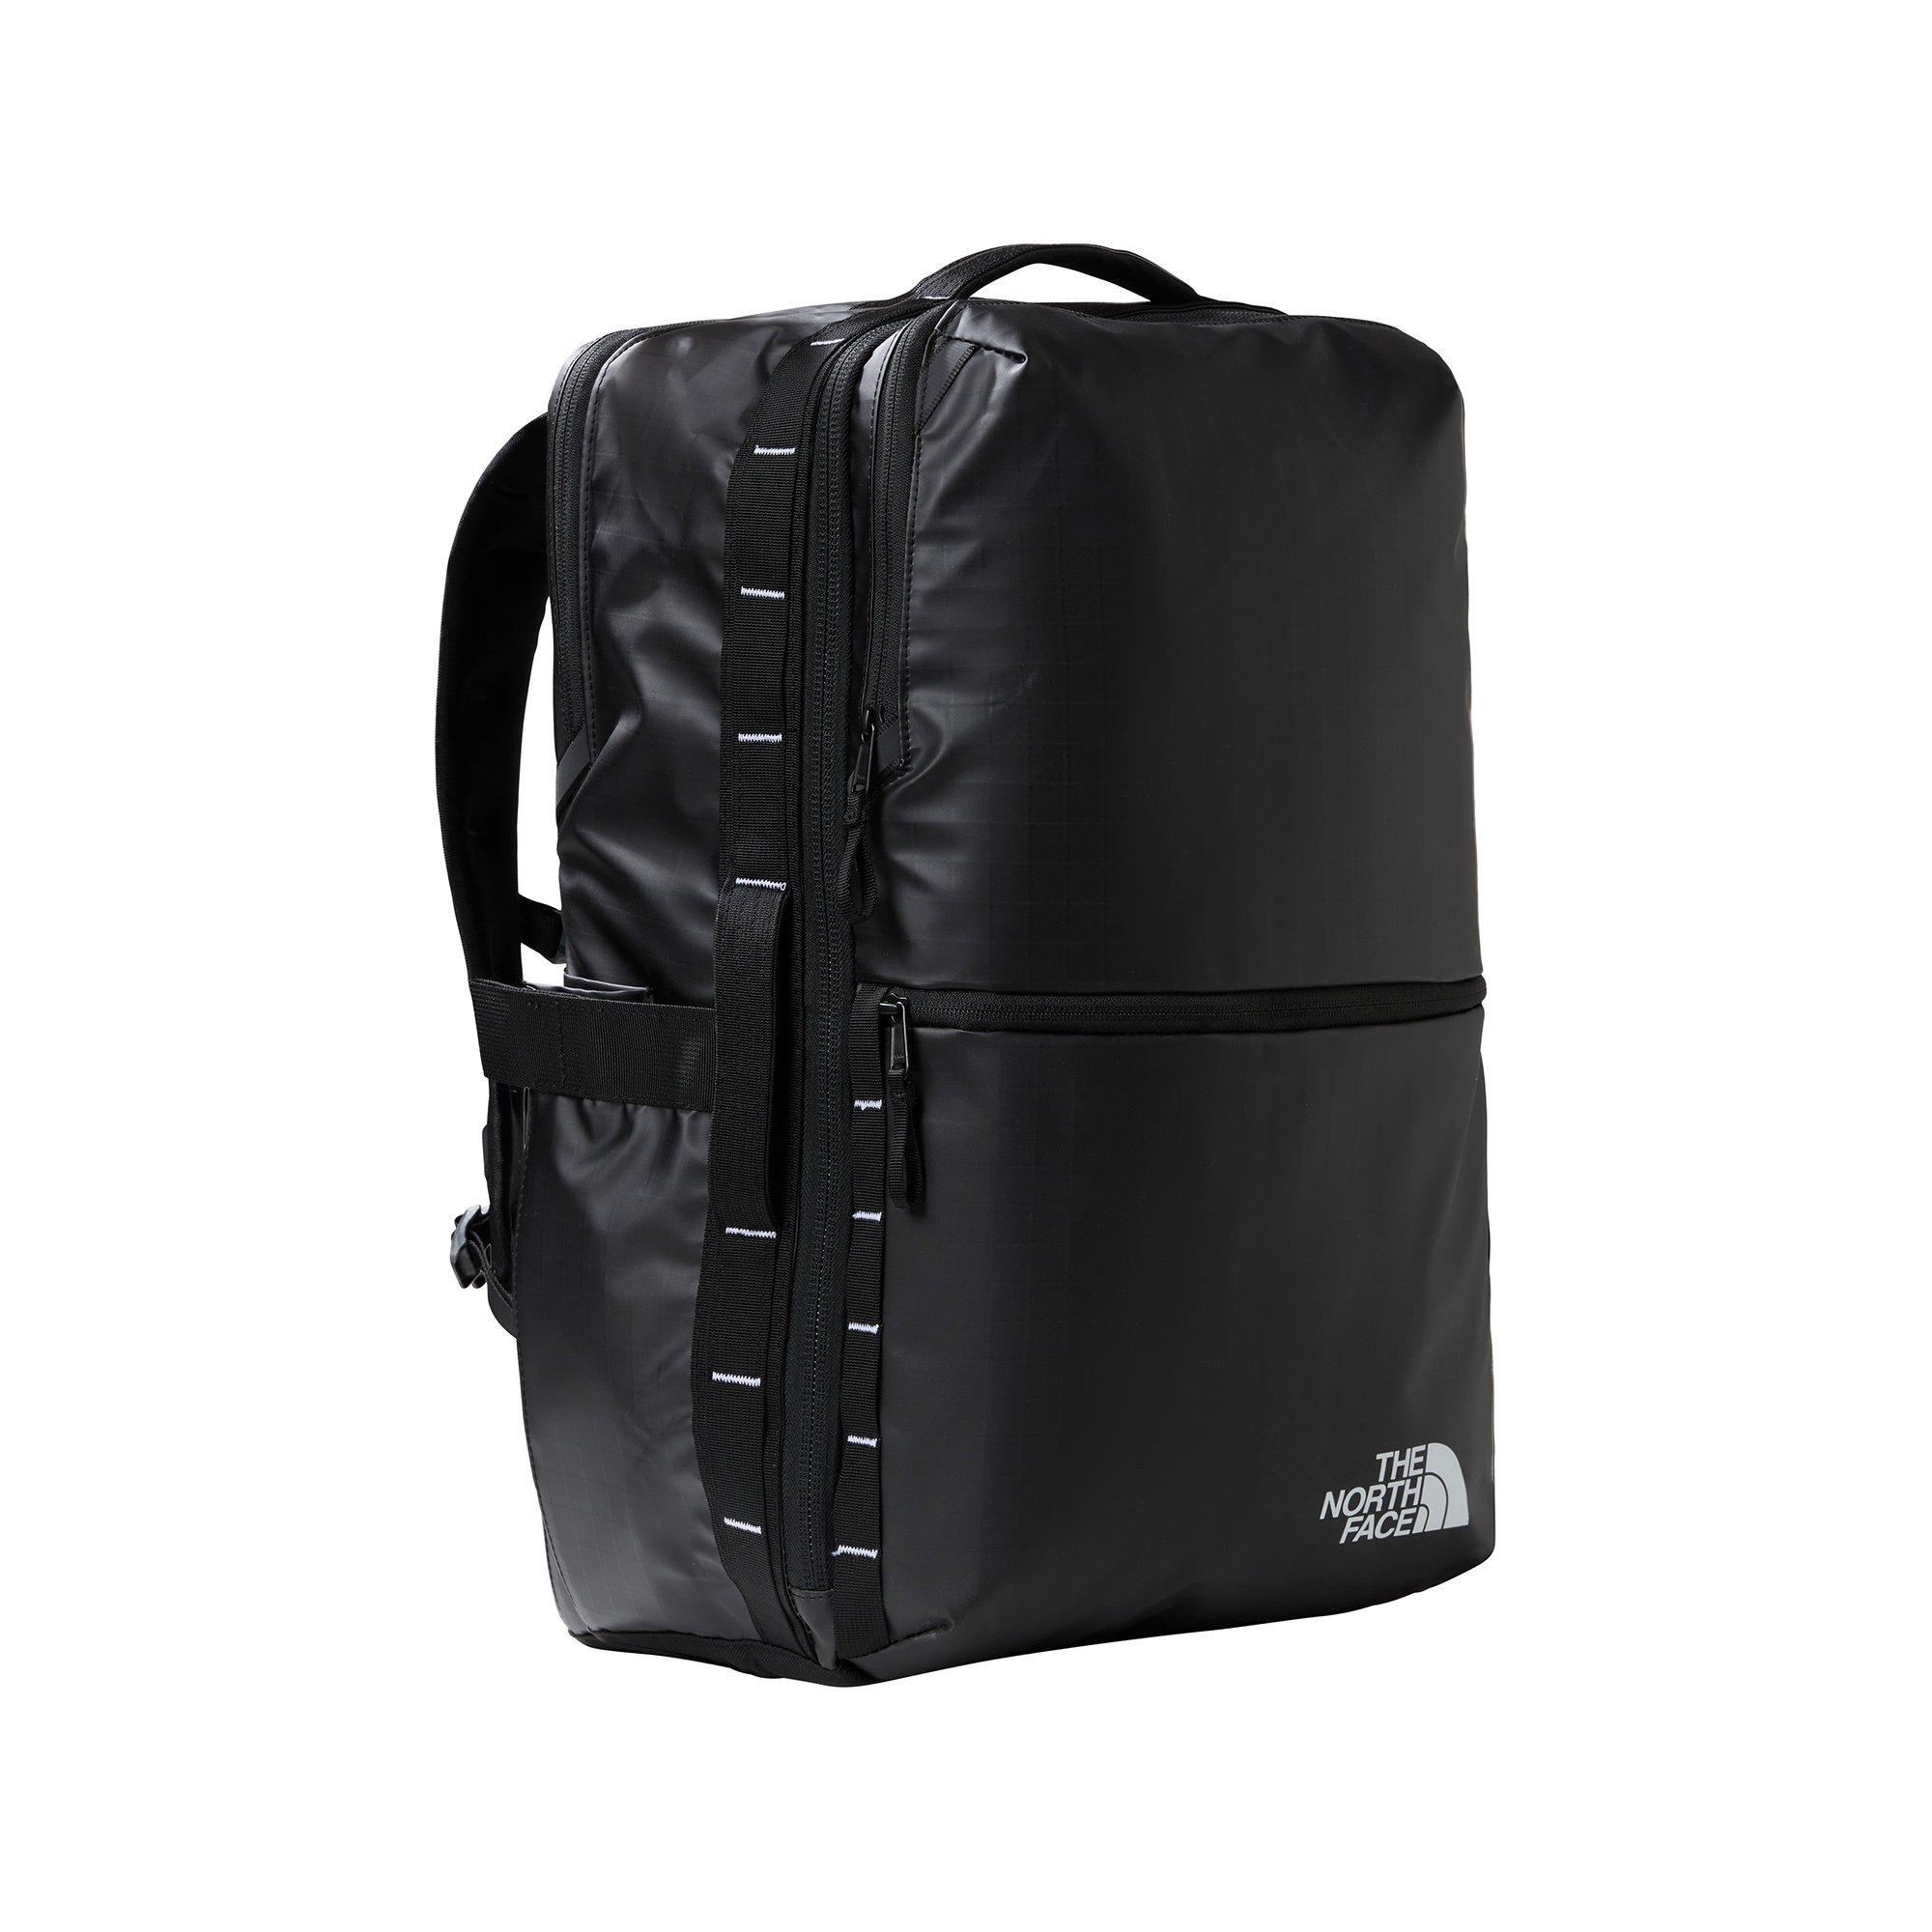 THE NORTH FACE BASE CAMP VOYAGER TRAVEL PACK Zaino multifunzionale 